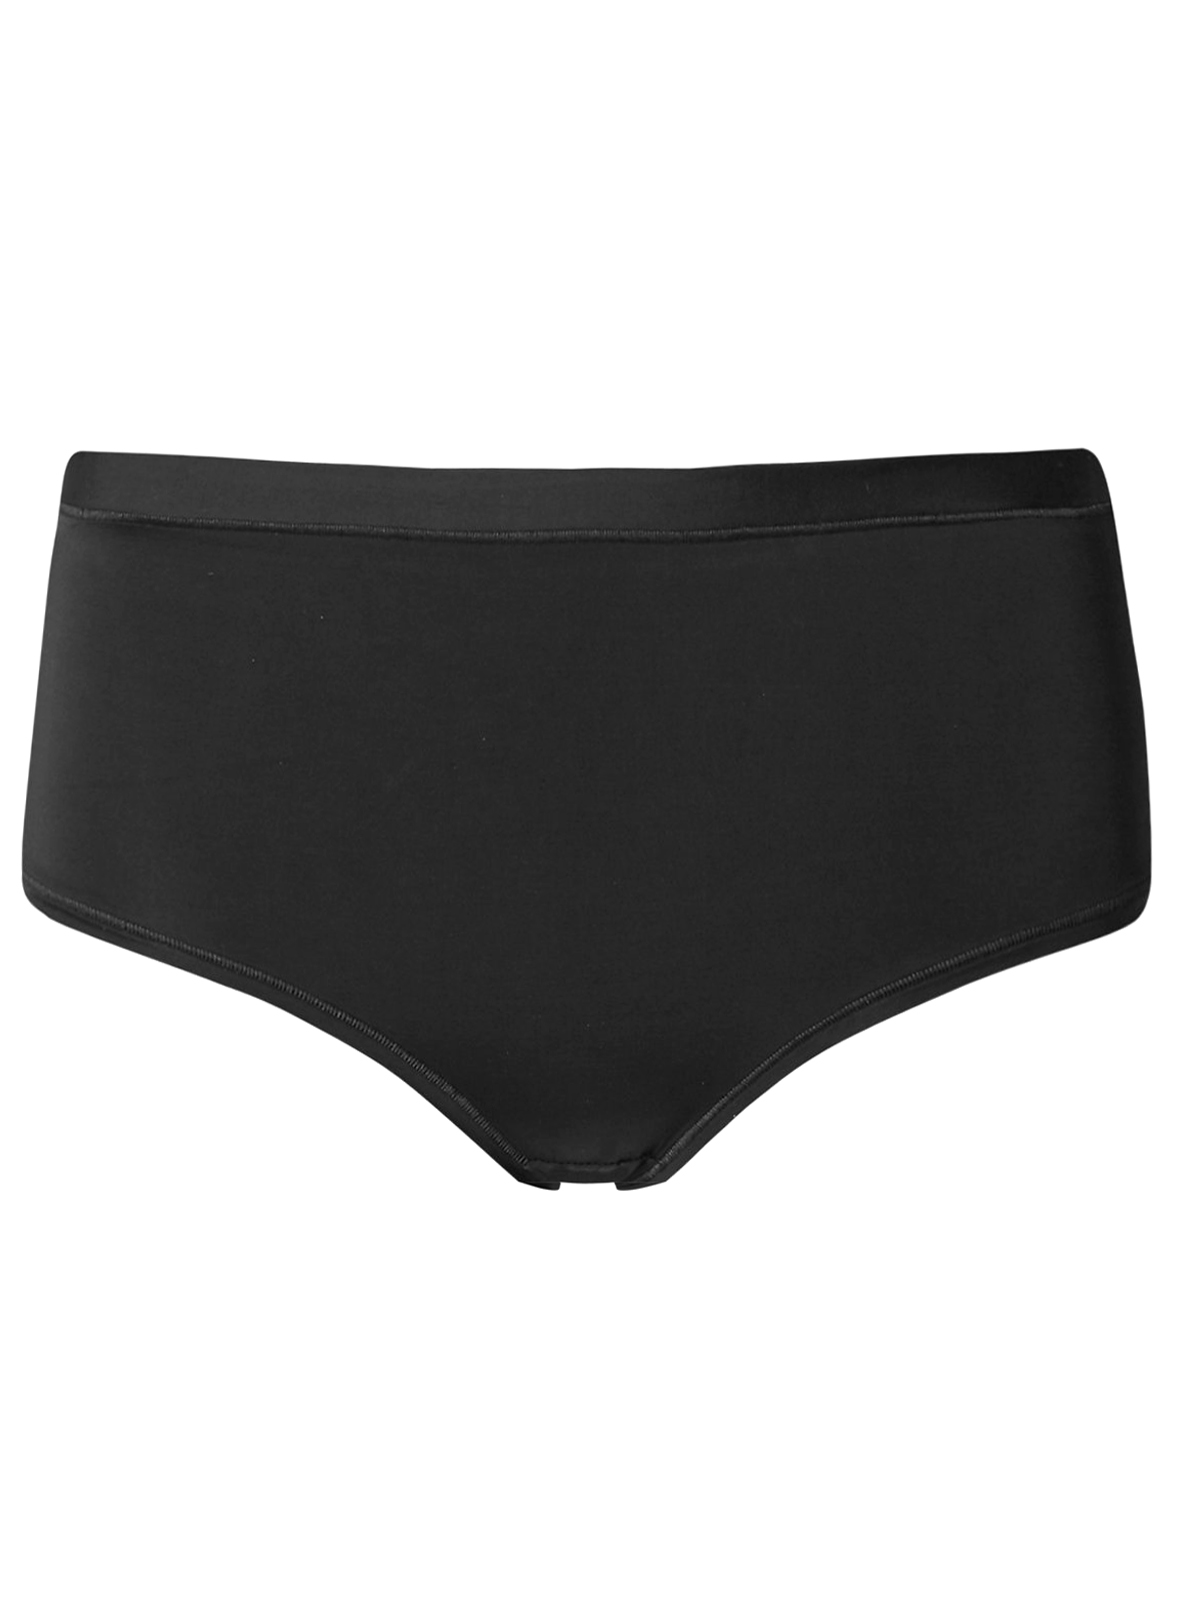 Marks and Spencer - - M&5 BLACK Ultimate Comfort Flexifit Midi Knickers ...